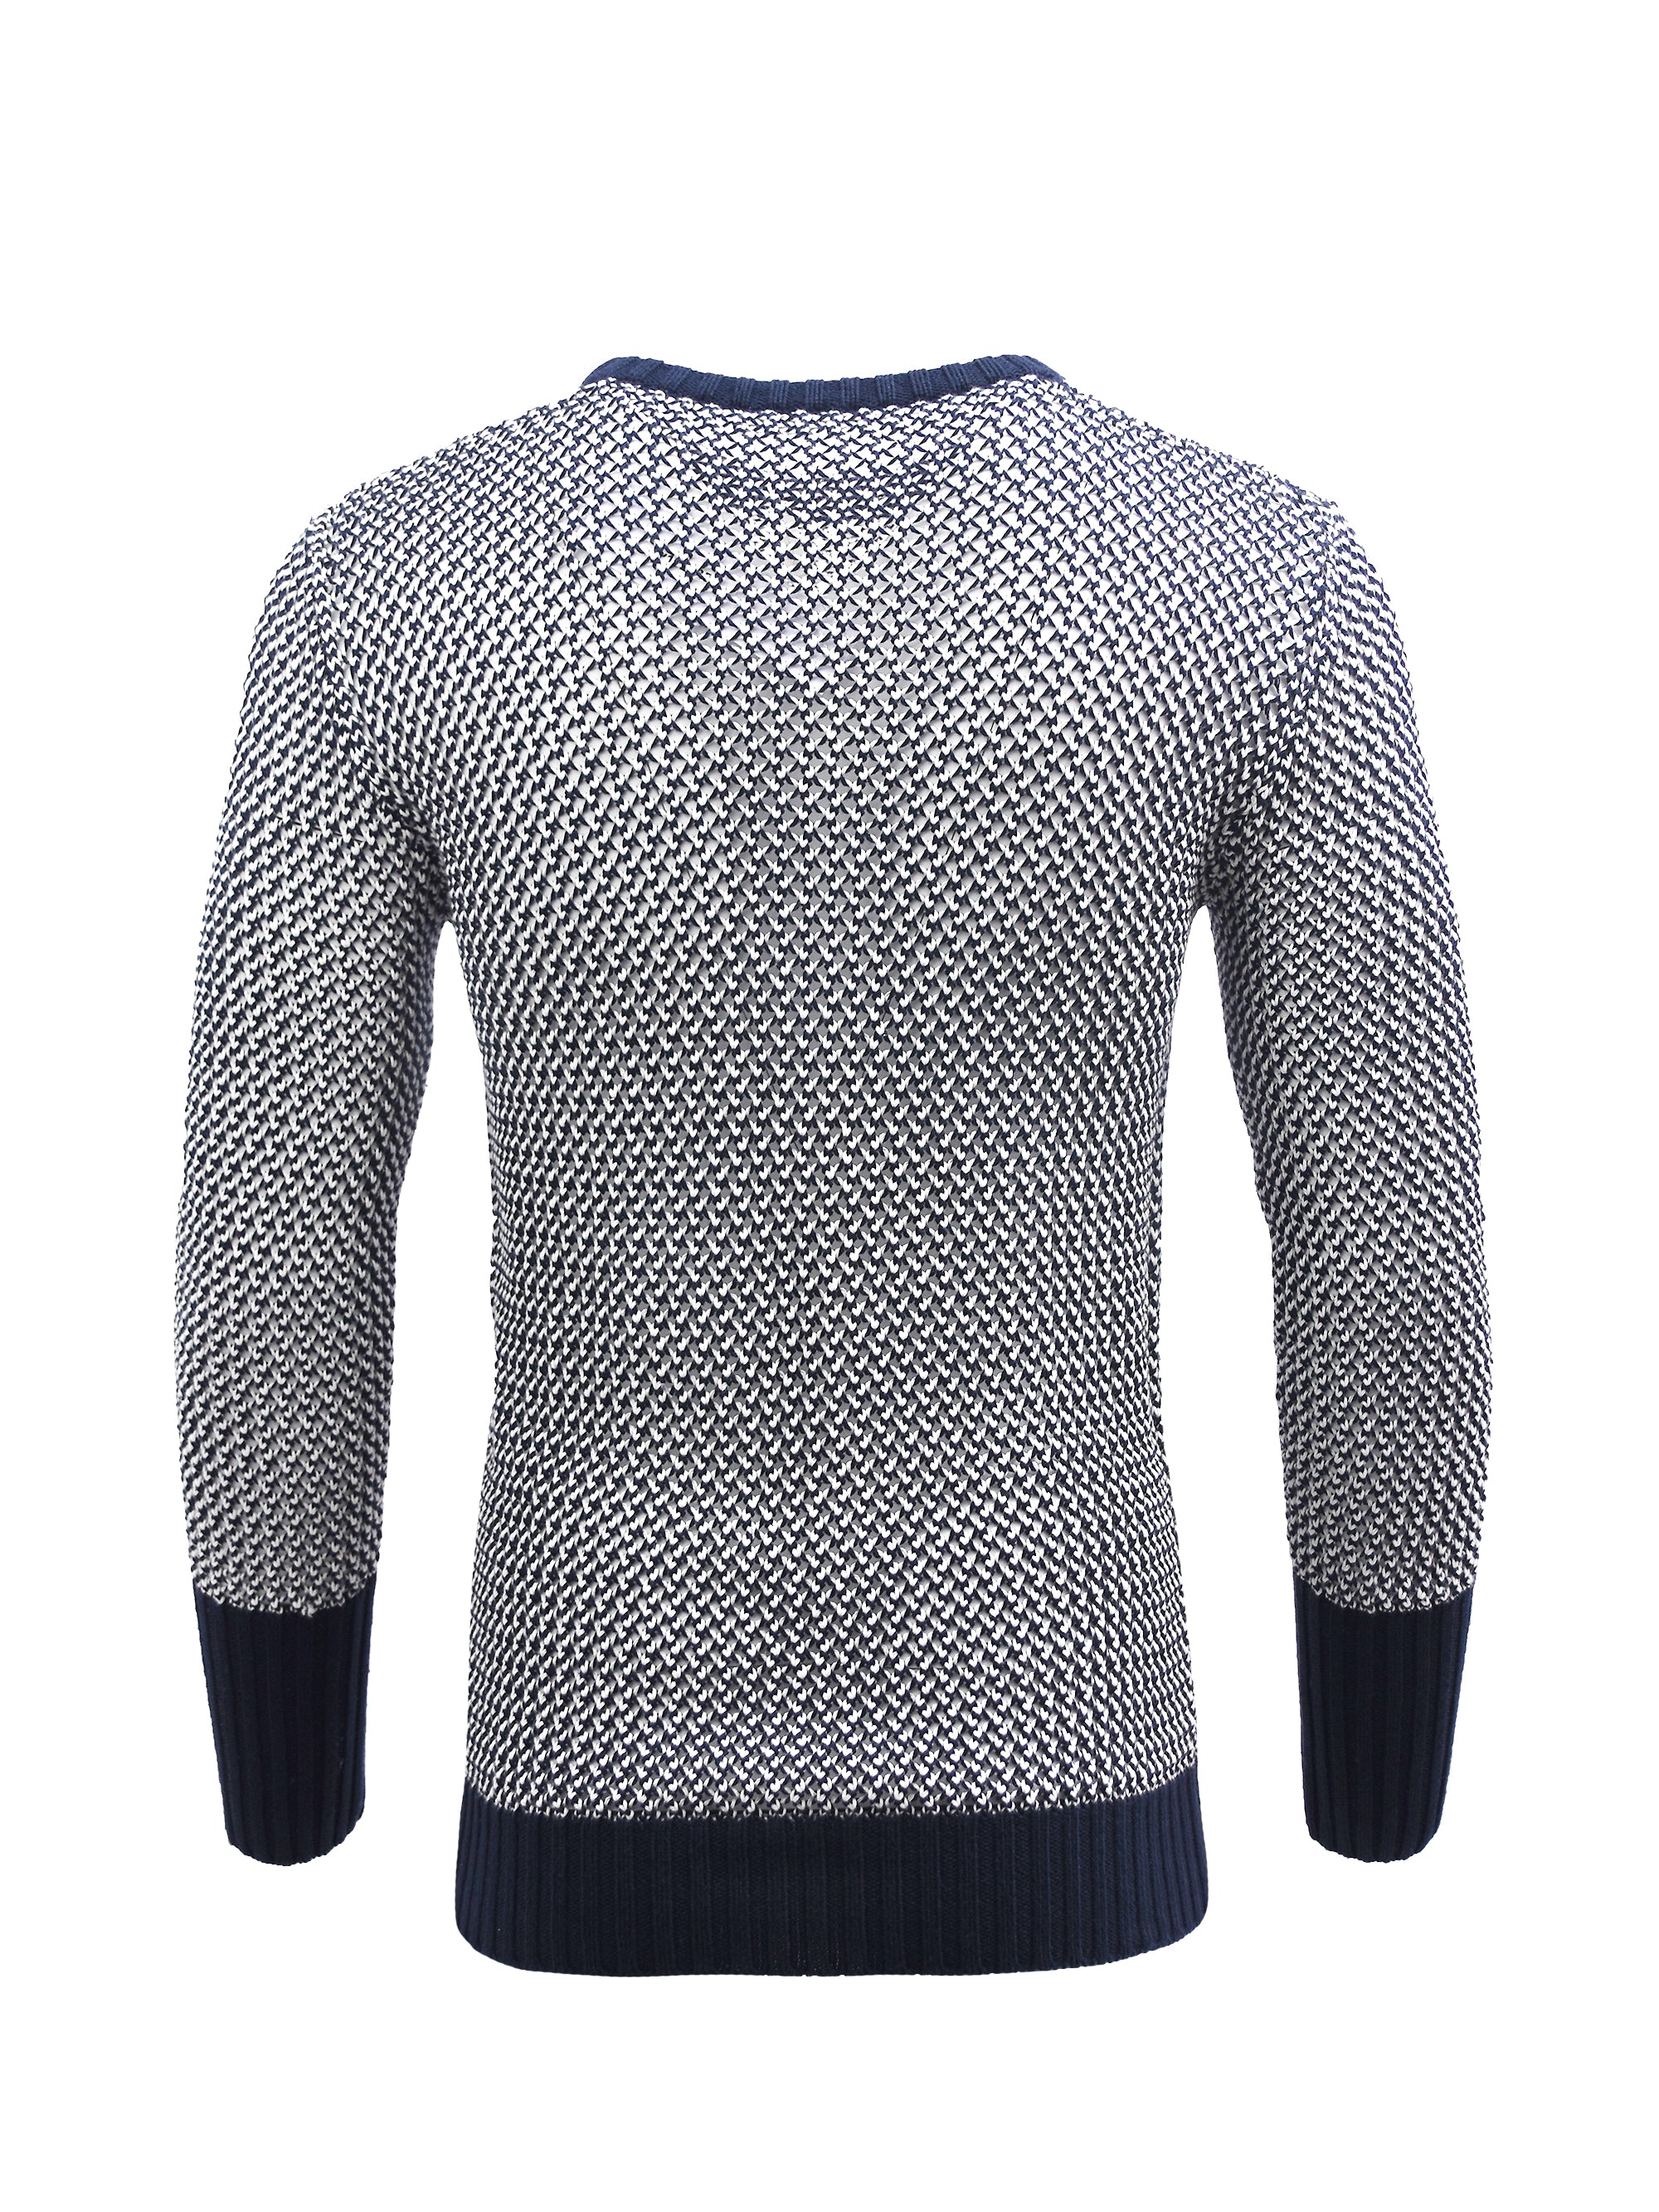 BLACK AND WHITE LIGHTWEIGHT KNITTED JUMPER